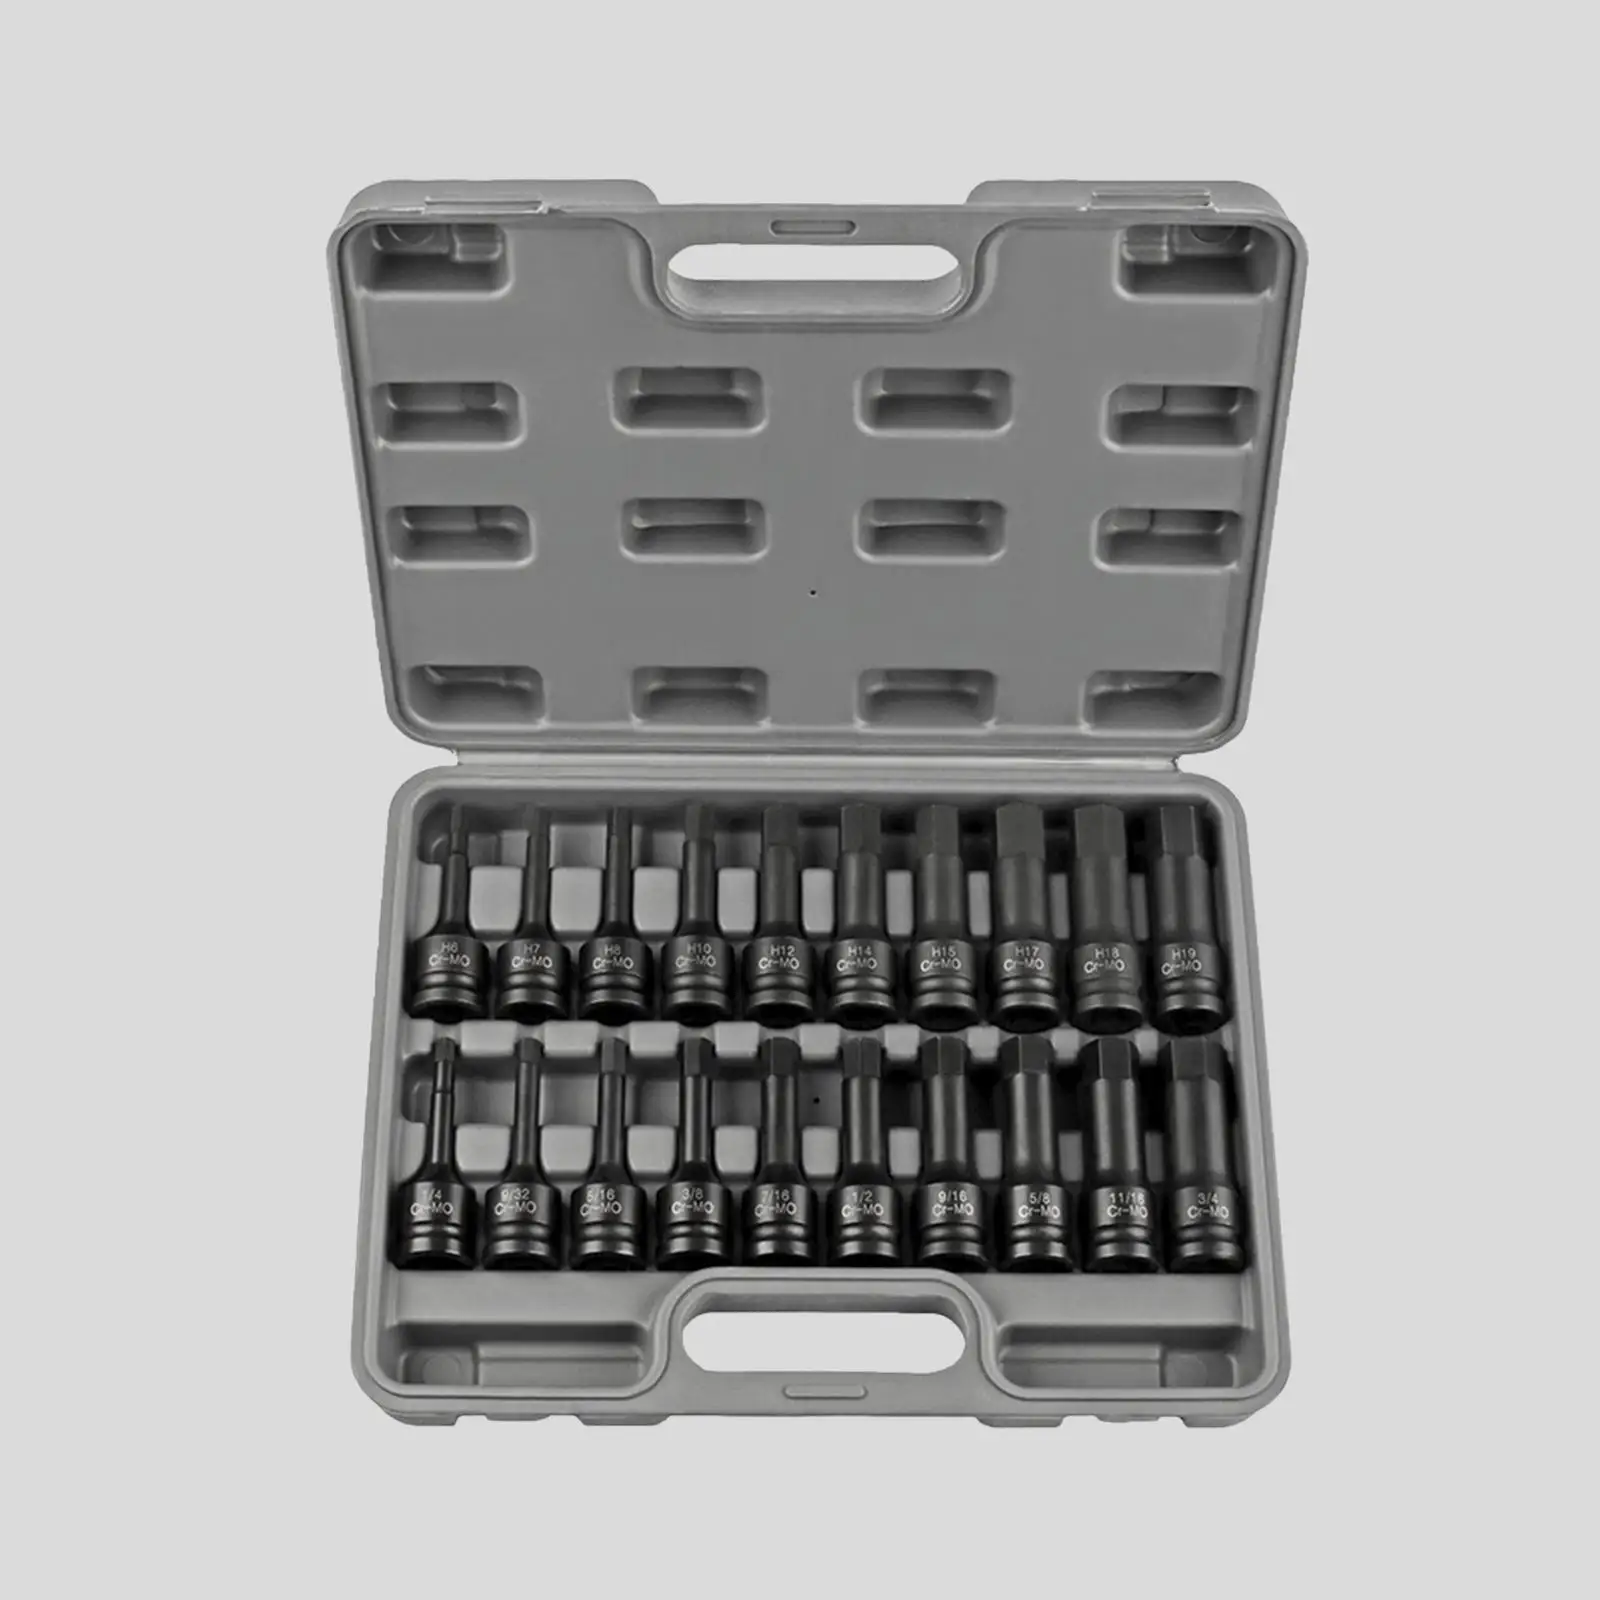 

20 Pieces 1/2" Drive Master Impact Hex Bit Set Bit Socket Heavy Duty for Industrial Equipment with Storage Box SAE and Metric